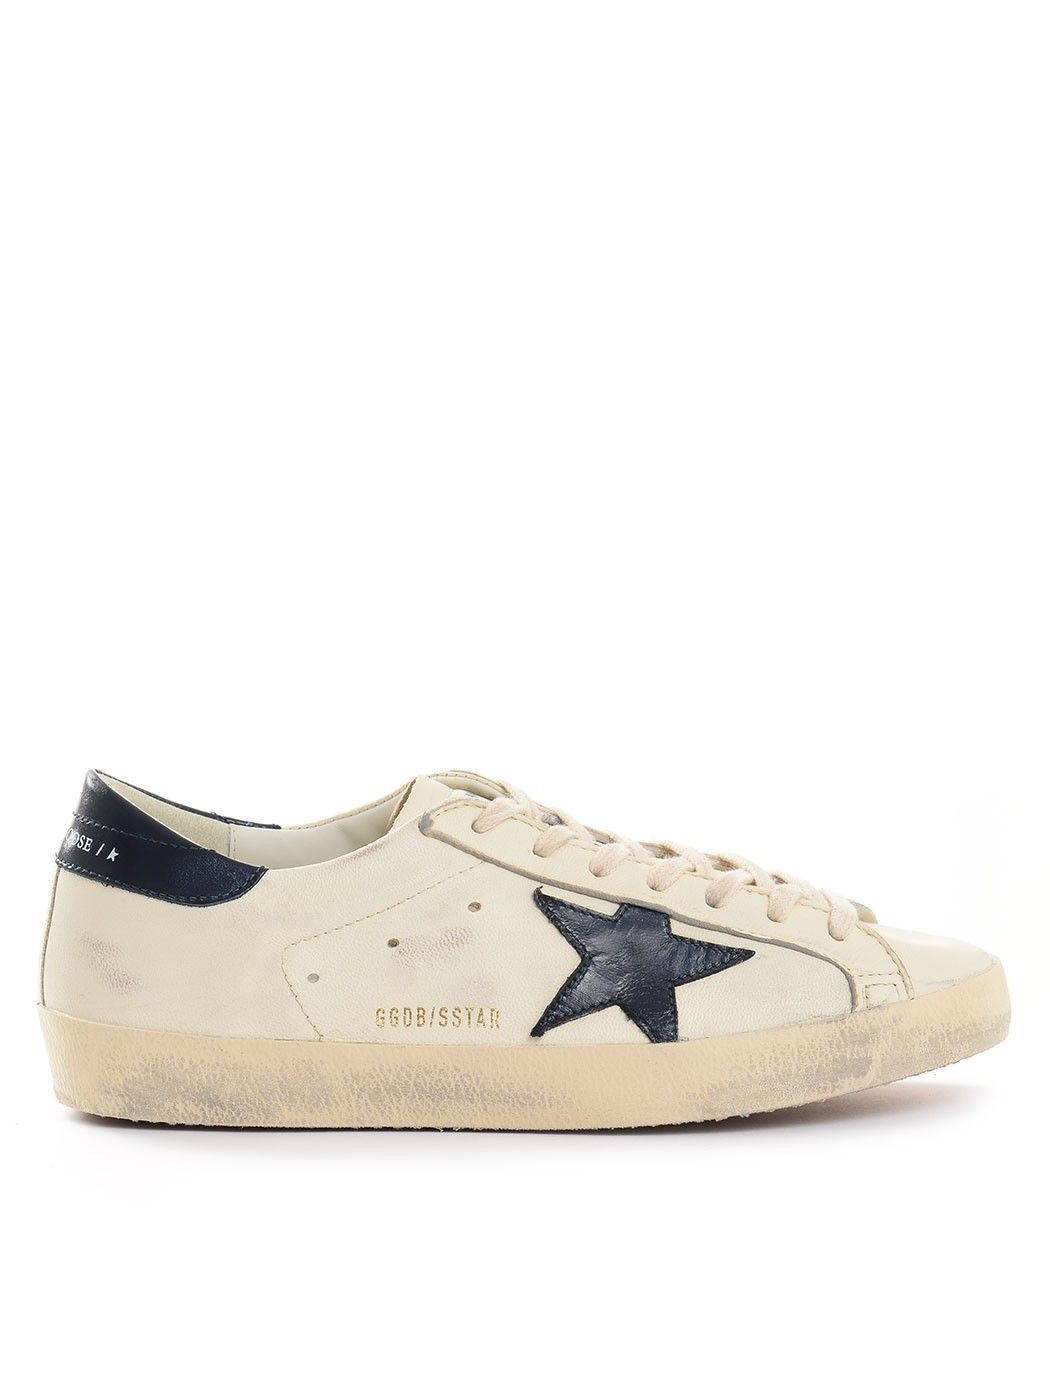  MAN SHOES,SPRING SUMMER SHOES,CHURCH'S SHOES,DIADORA HERITAGE SHOES,DIADORA HERITAGE SNEAKERS,GOLDEN GOOSE SHOES,GOLDEN GOOSE SNEAKERS  GOLDEN GOOSE GMF00101